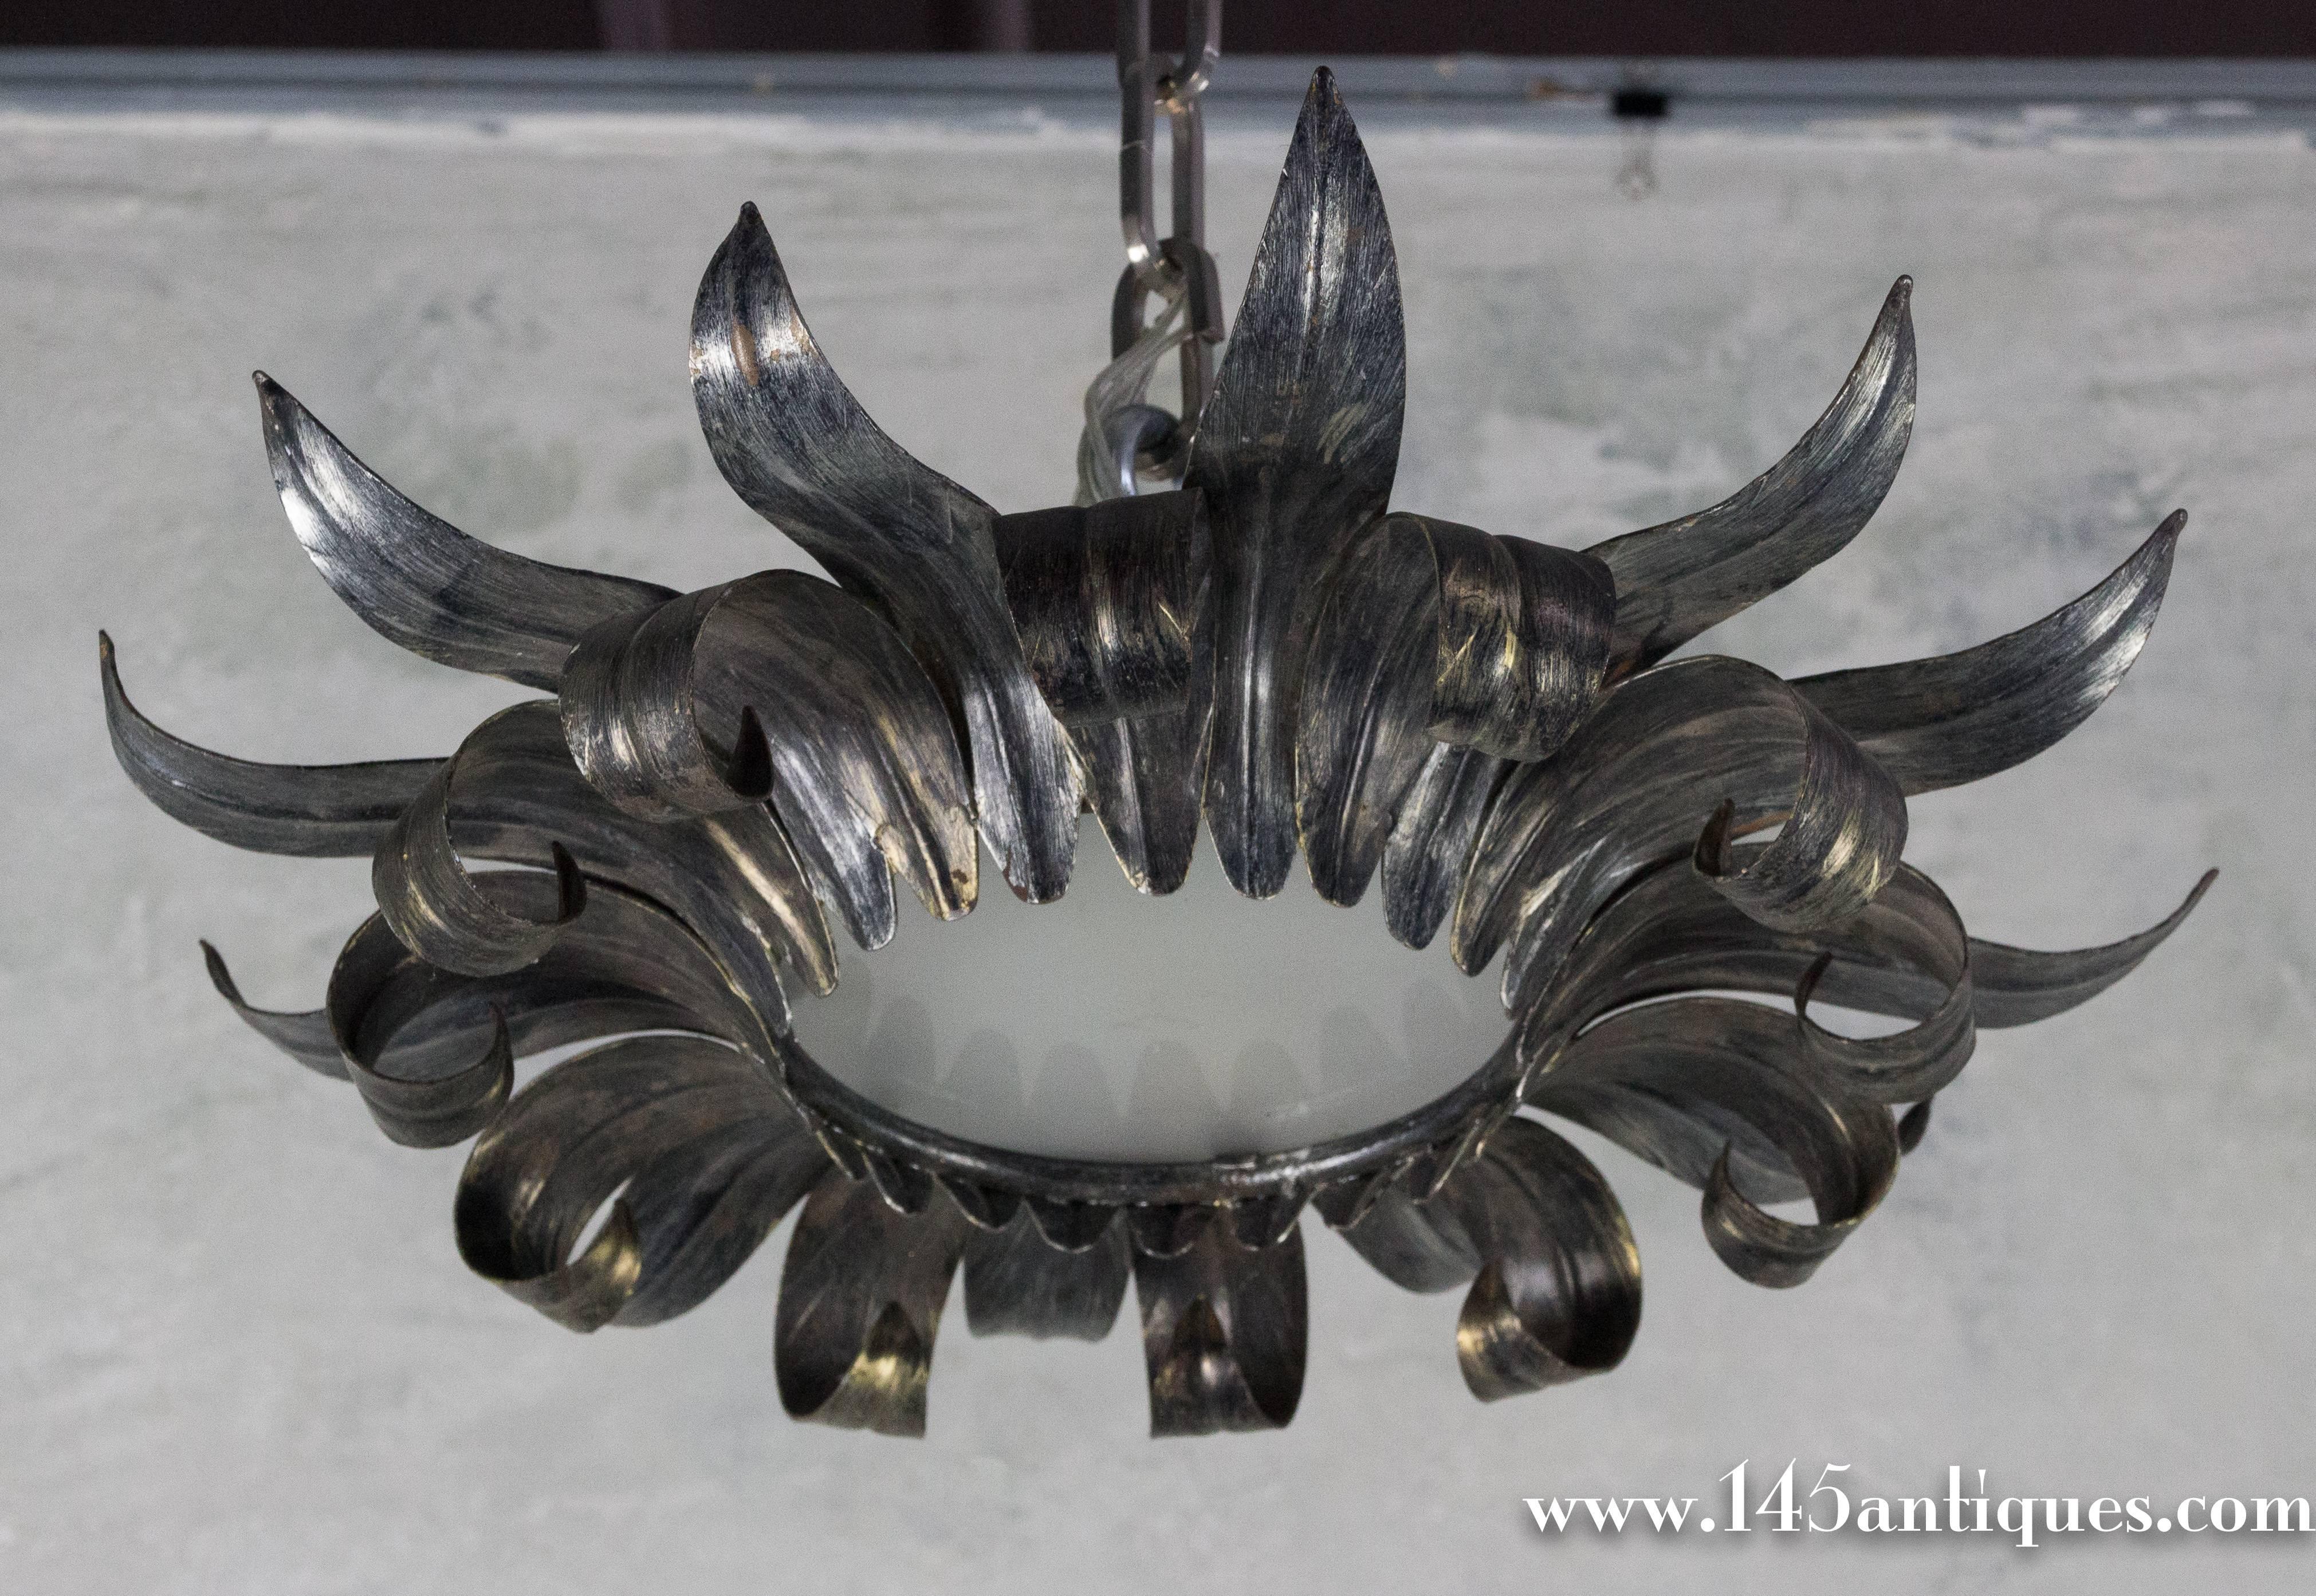 French 1950's silvered curved sunburst ceiling fixture with sandblasted glass. 

UL wiring and matching canopy included in purchase price. Please allow 3 weeks for wiring. UPS Shipping quote available on request.